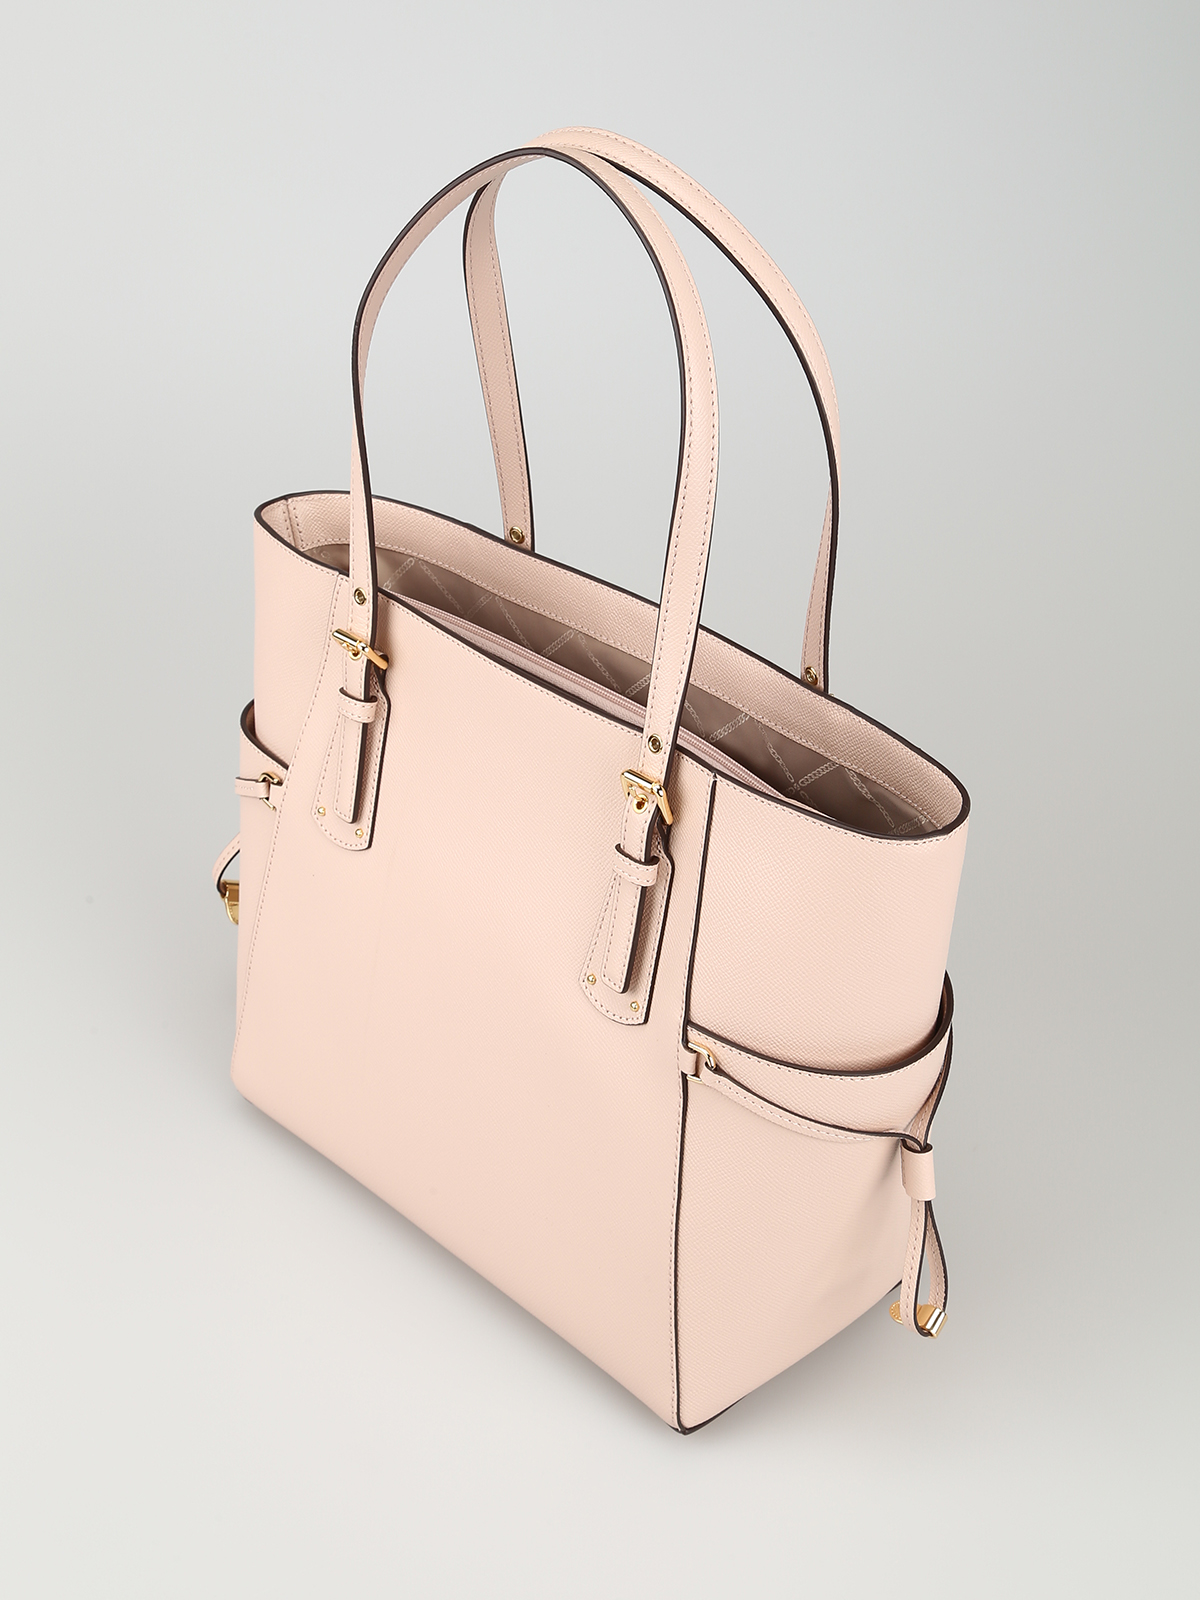 michael kors voyager tote soft pink